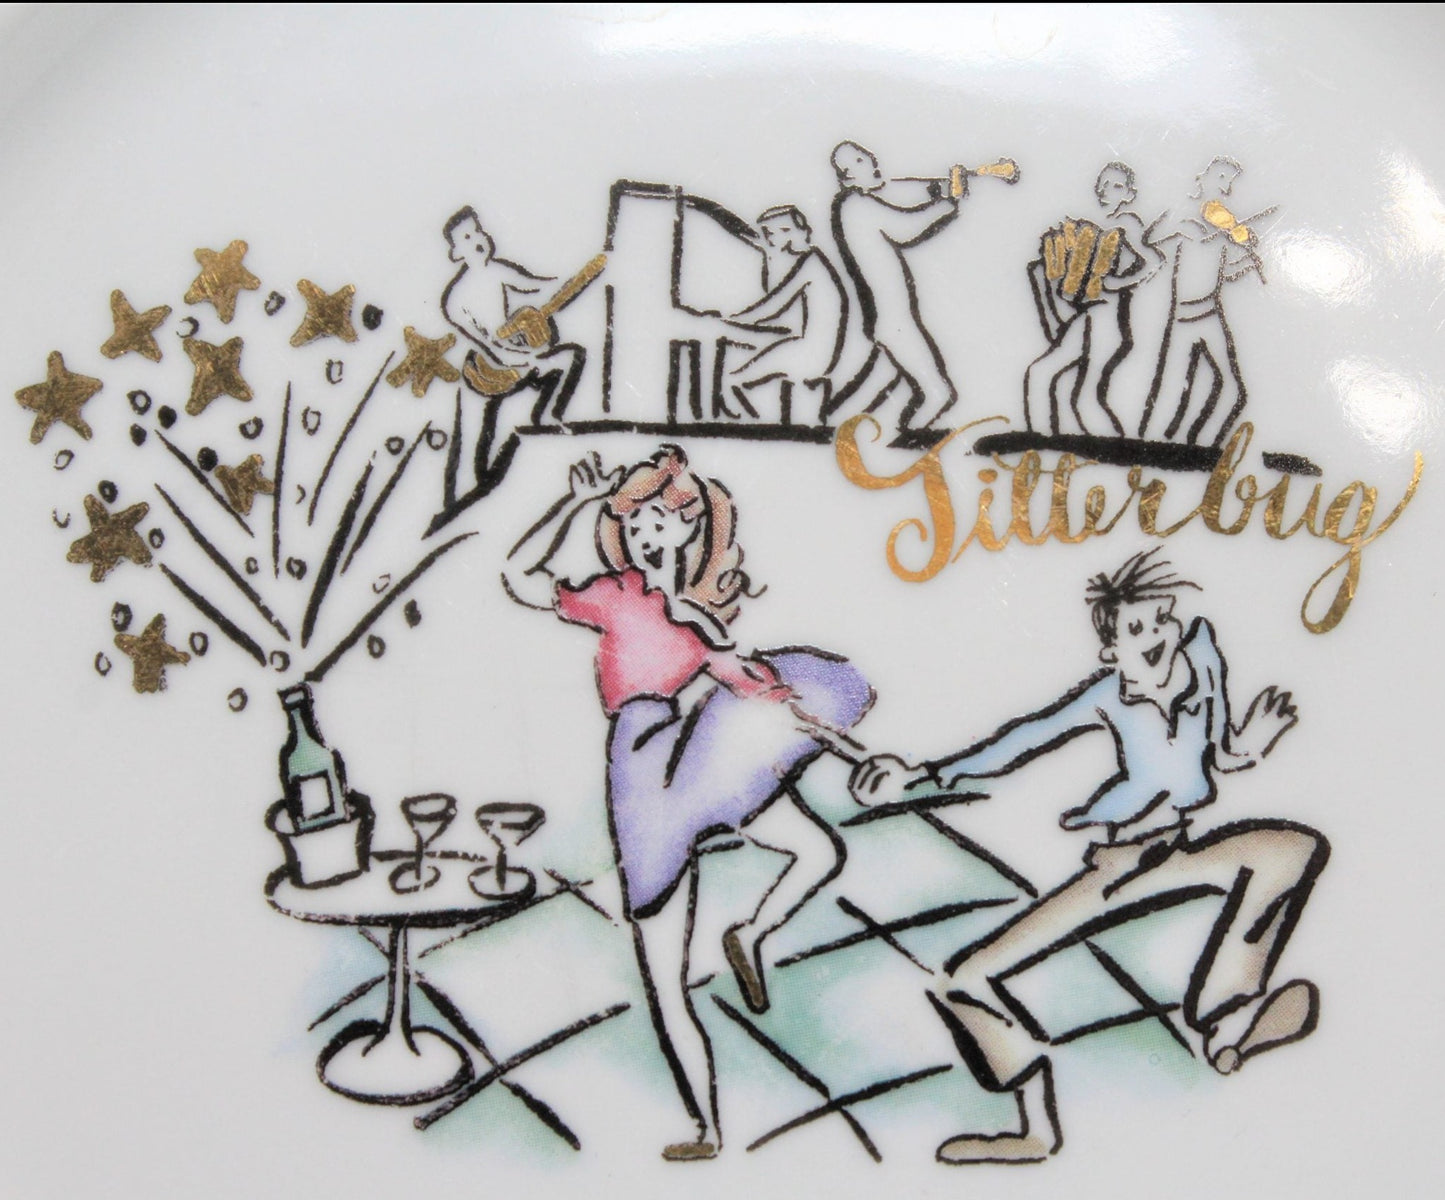 Decorative Plate, New Year's Plate, 1940 Jitterbug, Rosanna, Italy, Vintage